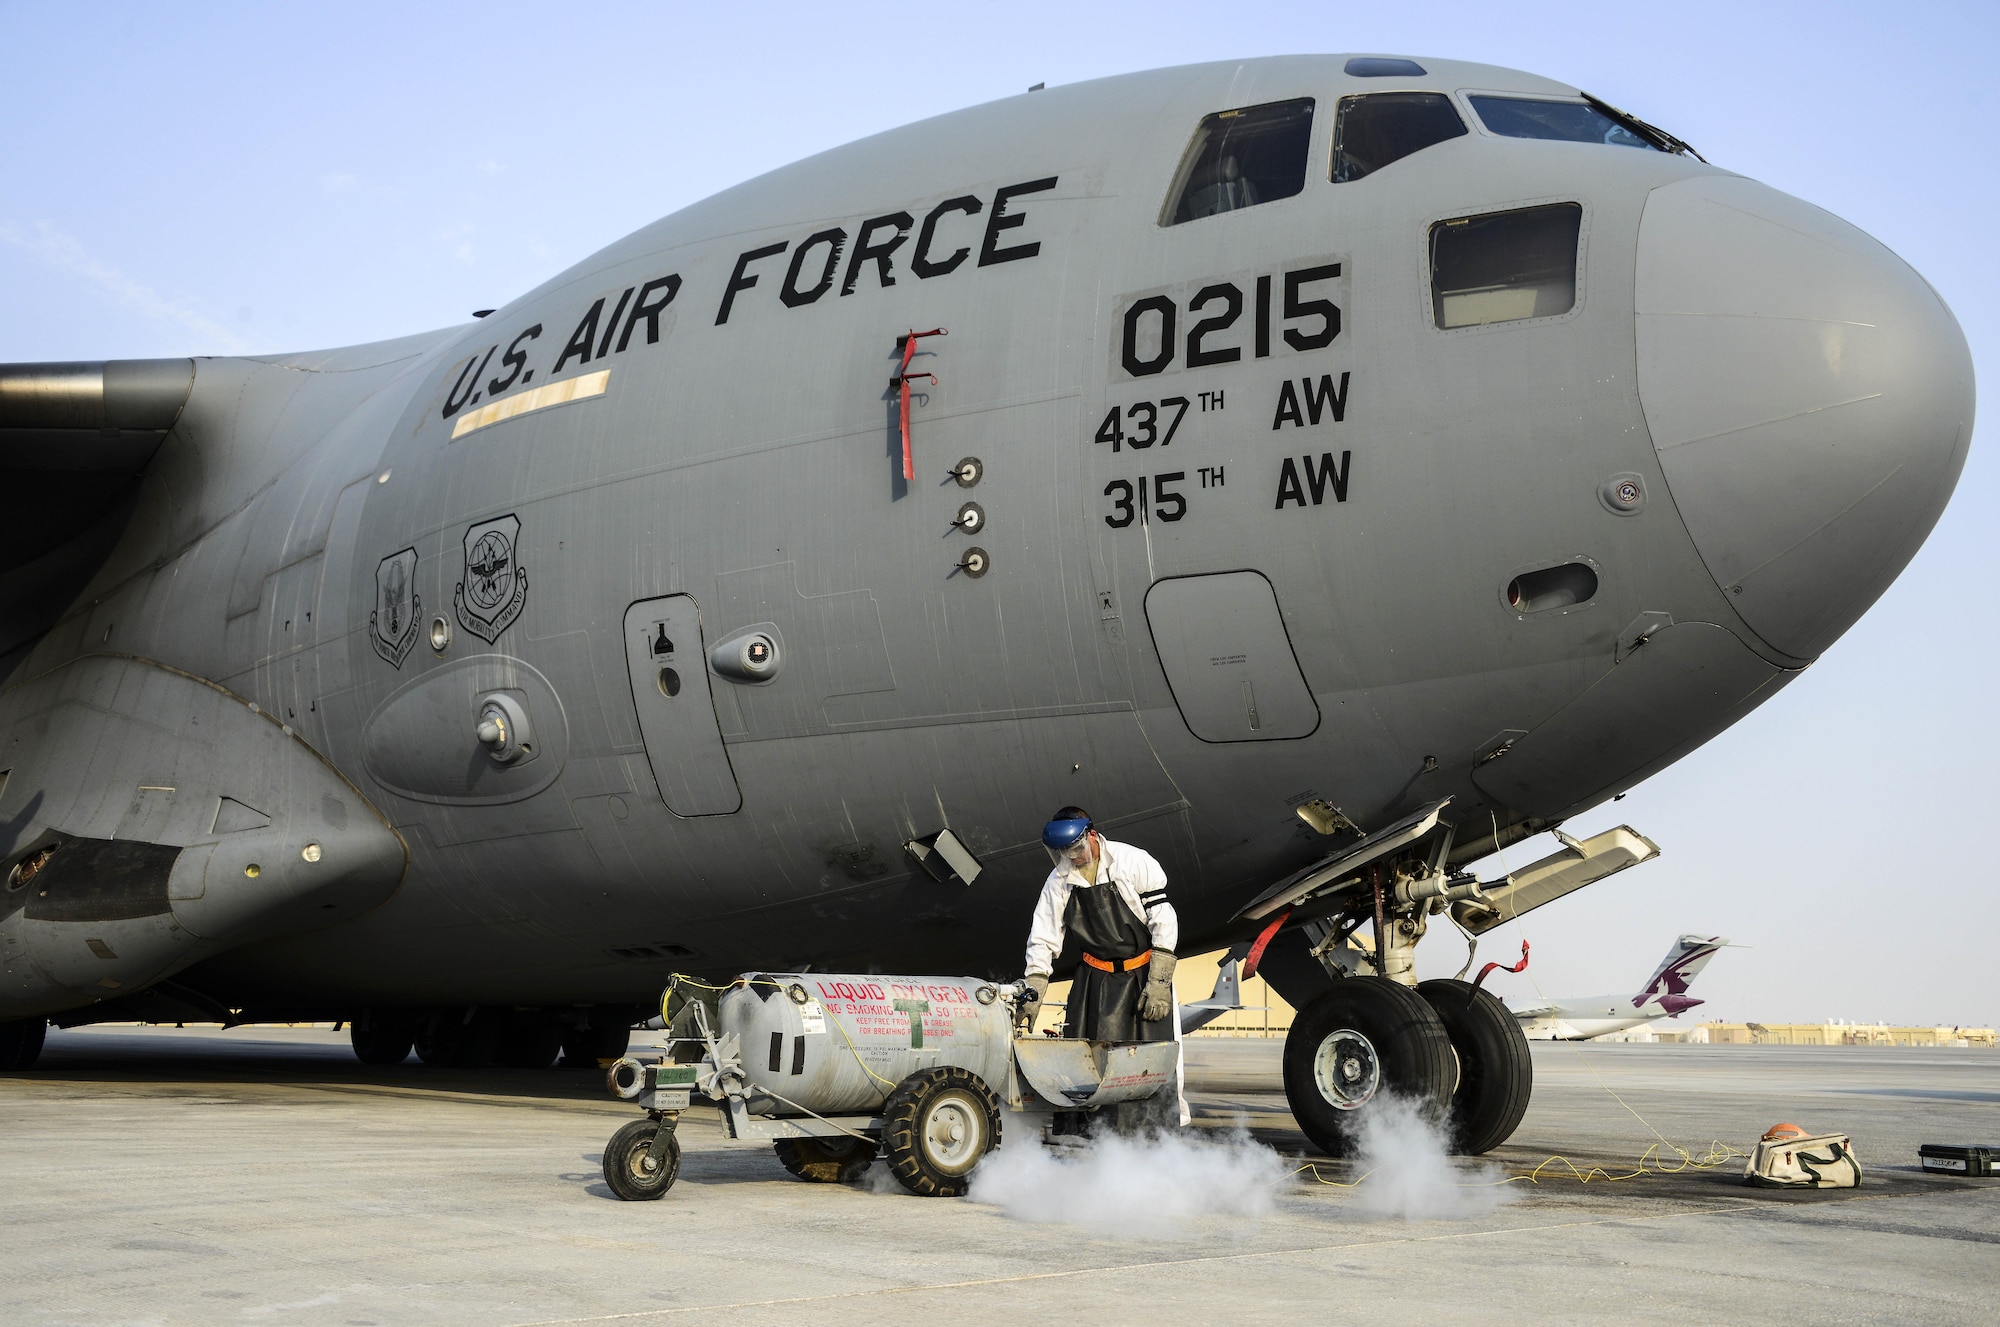 Senior Airman Christopher Martinez, 8th Expeditionary Air Mobility Squadron crew chief, prepares a liquid oxygen tank prior to recharging a C-17 Globemaster III Sept. 3, 2016, at Al Udeid Air Base, Qatar. Martinez works with liquid oxygen that is recharged into an aircraft to provide pure oxygen to aircrews during missions. Martinez joined the Air Force to follow his father’s footsteps and continue his family’s military legacy. (U.S. Air Force photo/Senior Airman Janelle Patiño/Released)